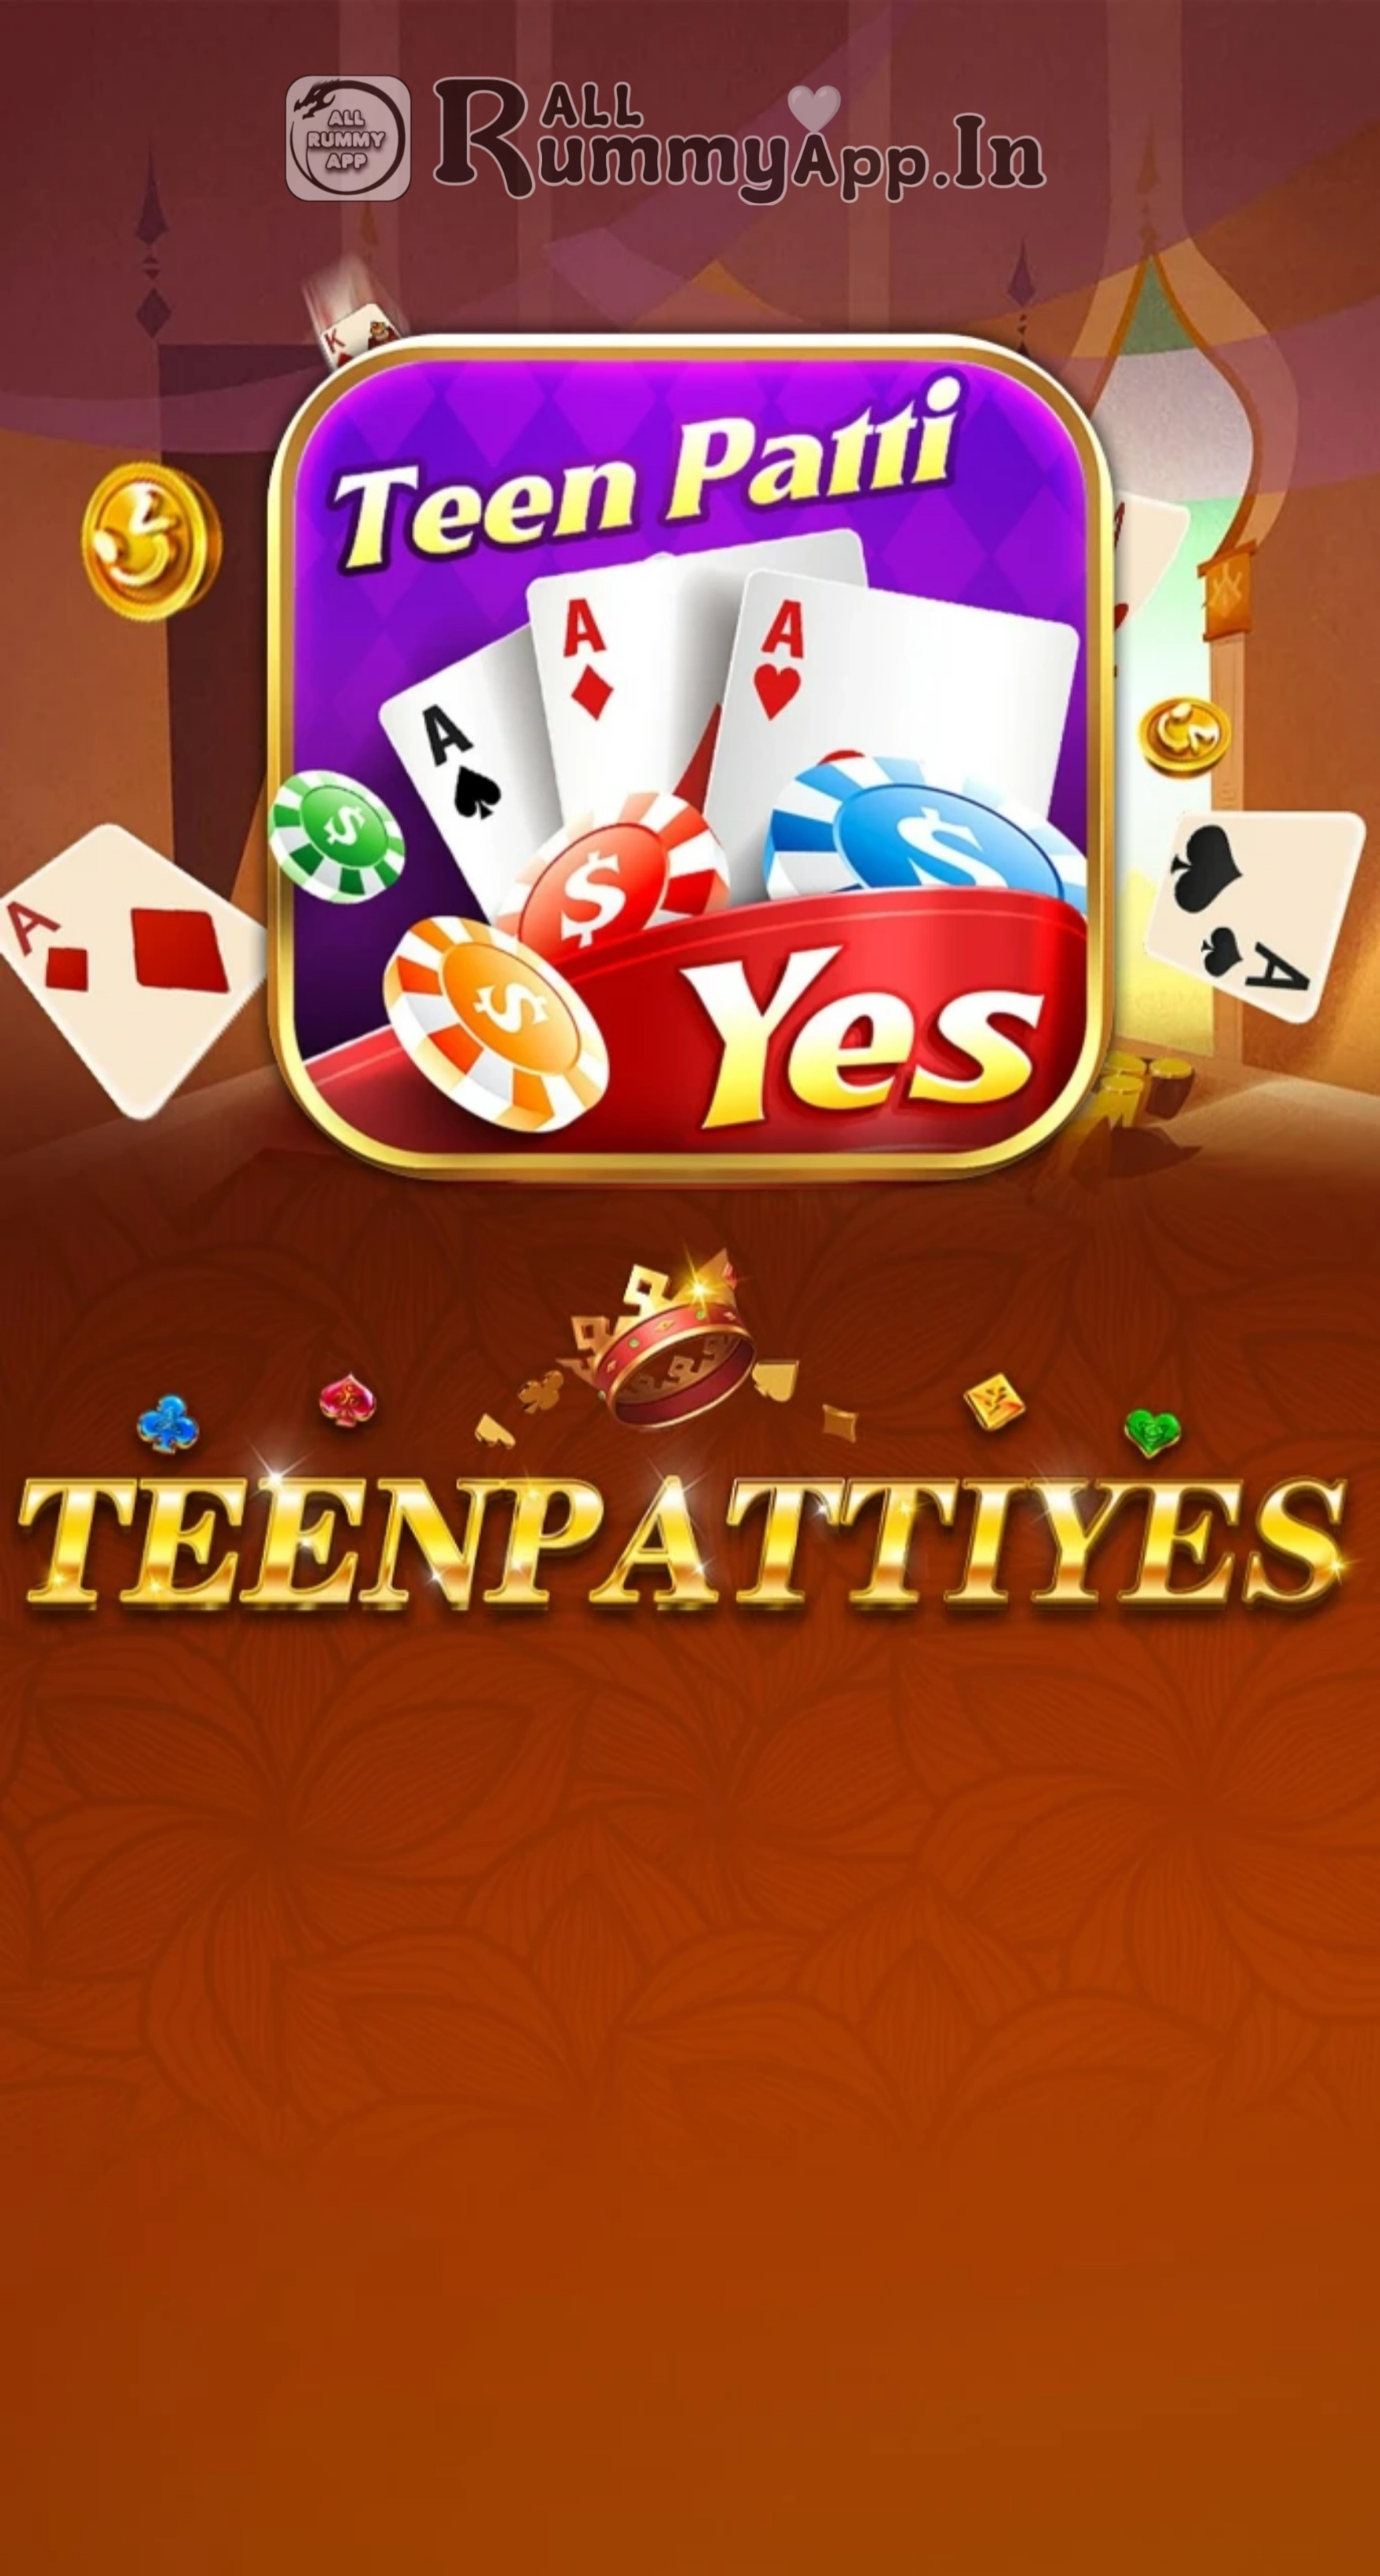 Teen Patti Yes App Download